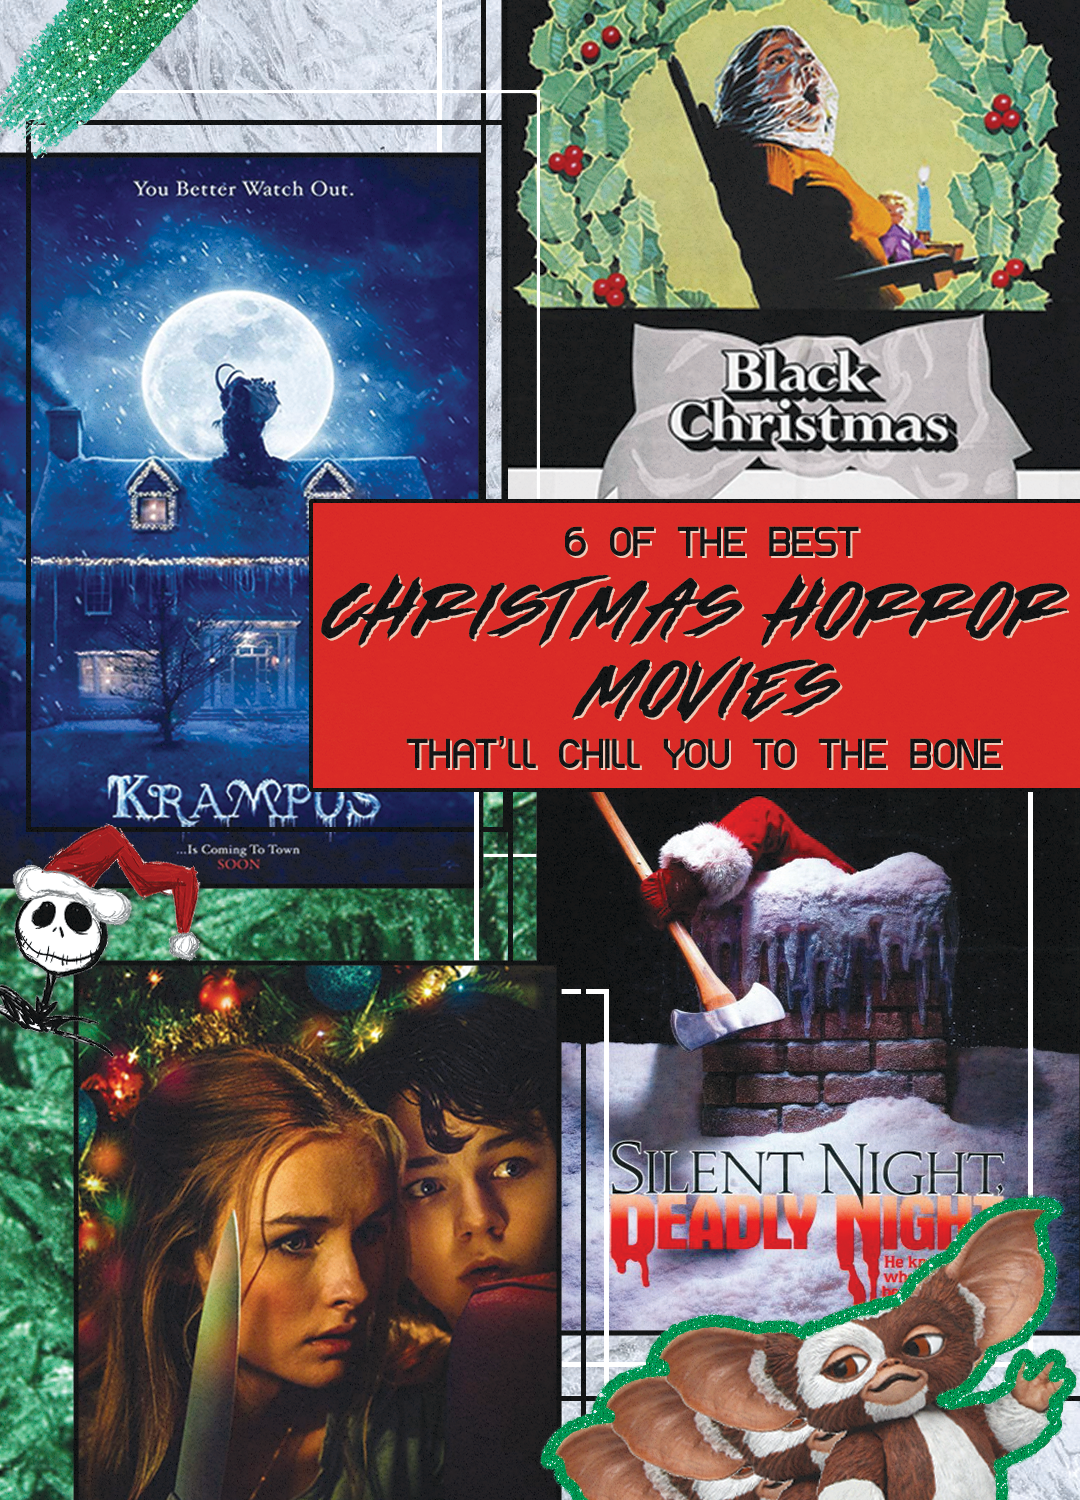 6 OF THE BEST CHRISTMAS HORROR MOVIES THAT’LL CHILL YOU TO THE BONE